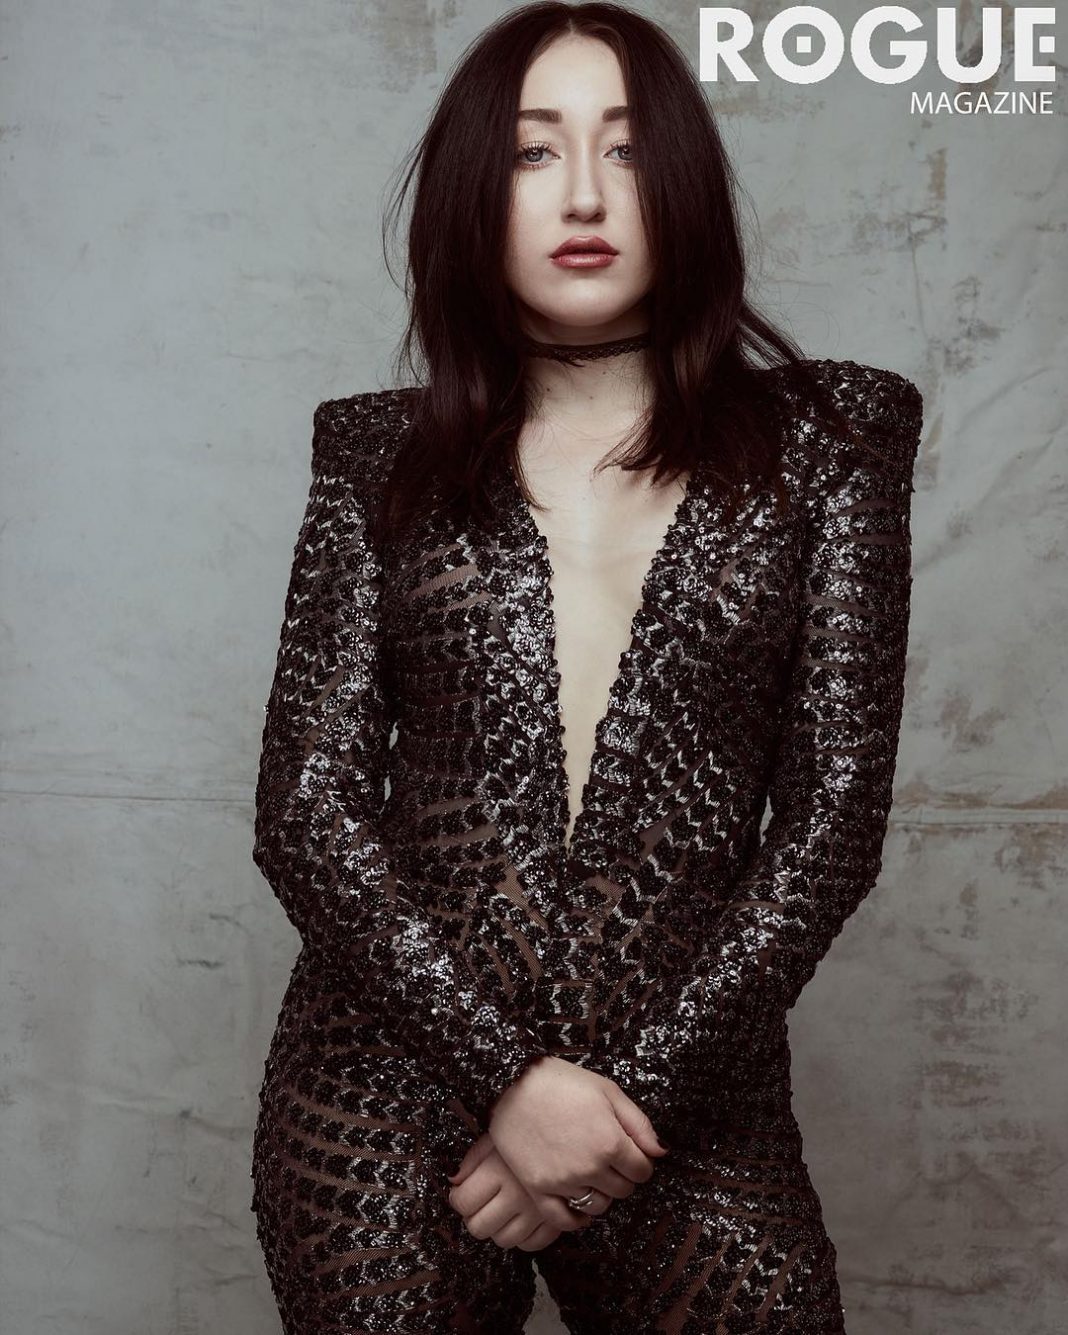 49 Noah Cyrus Nude Pictures Will Make You Slobber Over Her 34